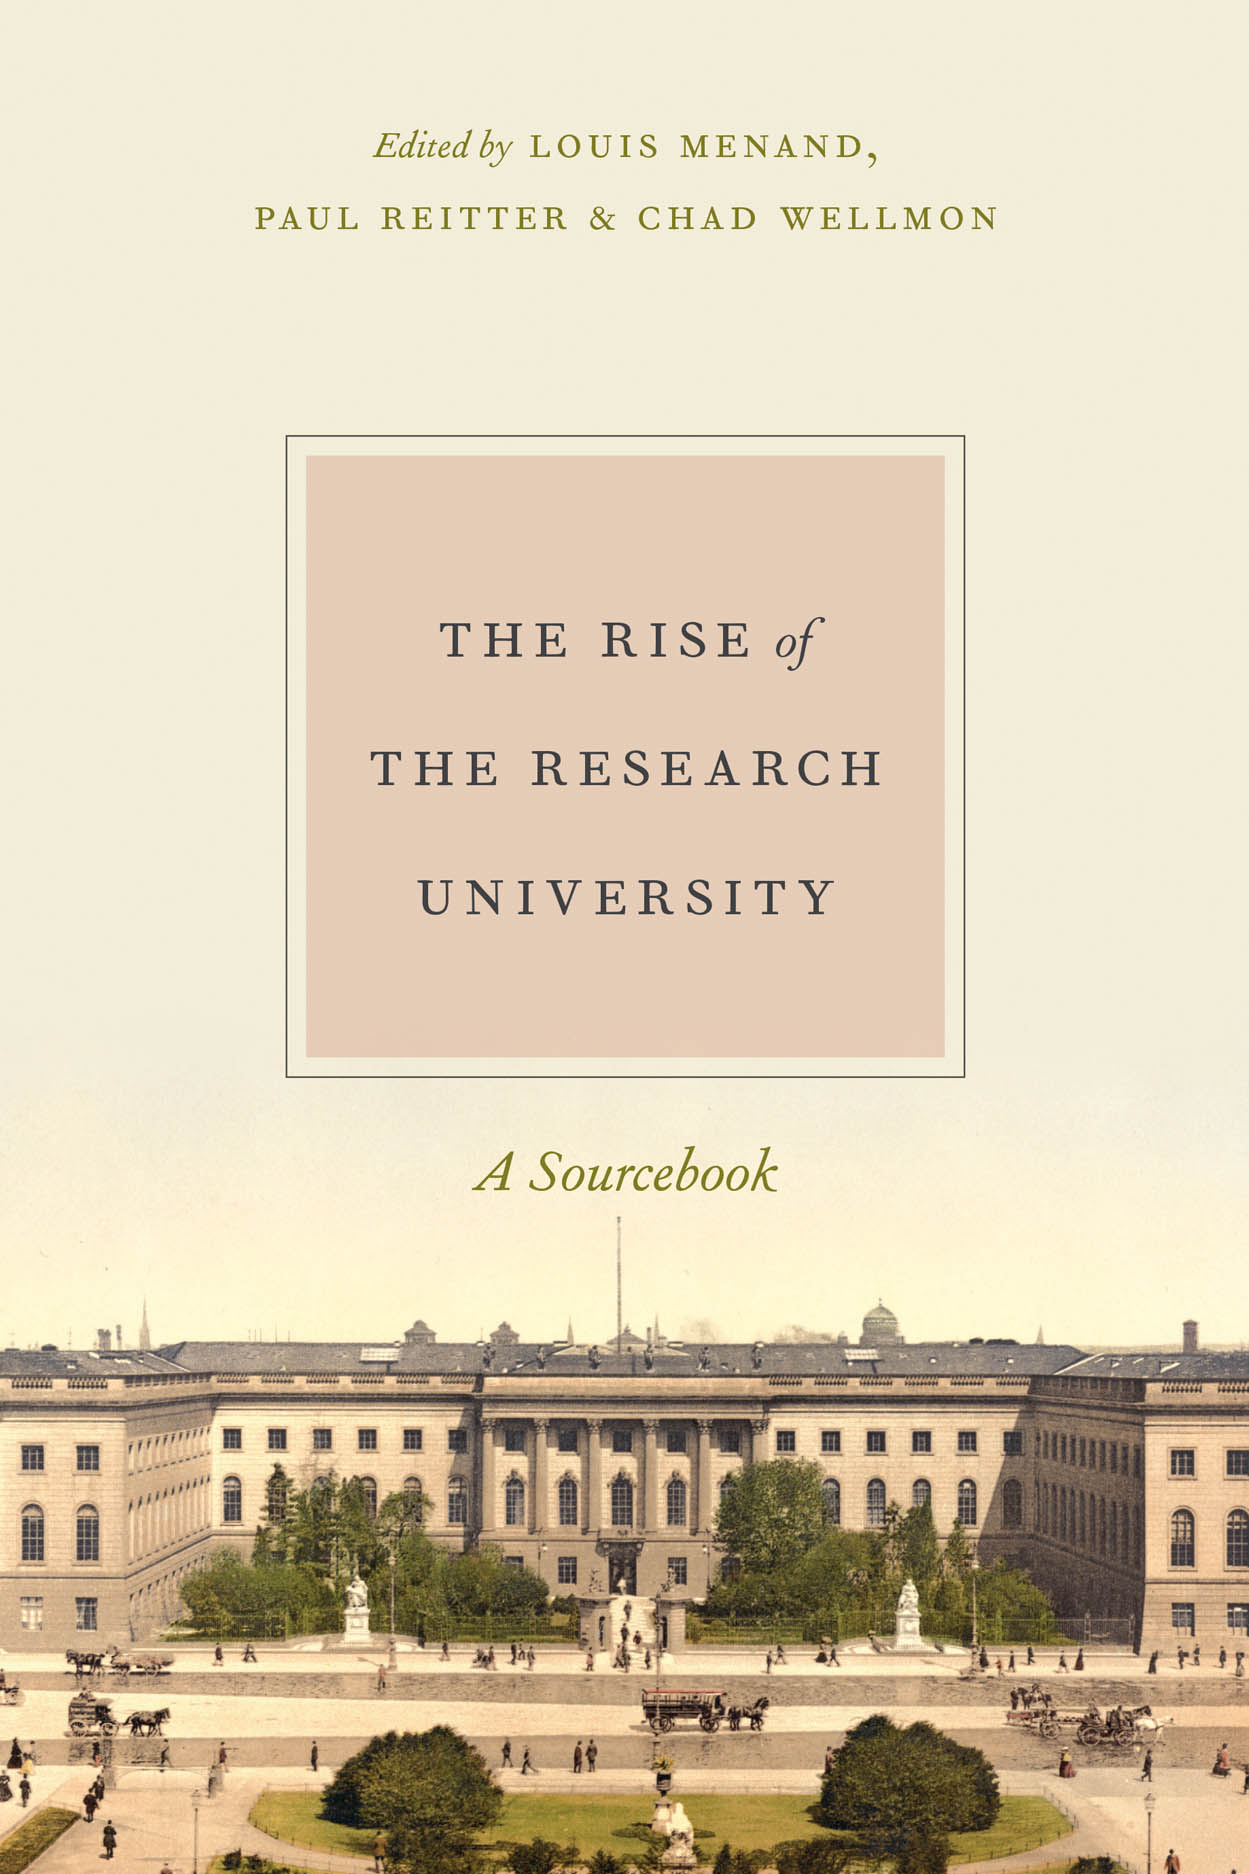 The Rise of the Research University: A Sourcebook, Menand, Reitter, Wellmon